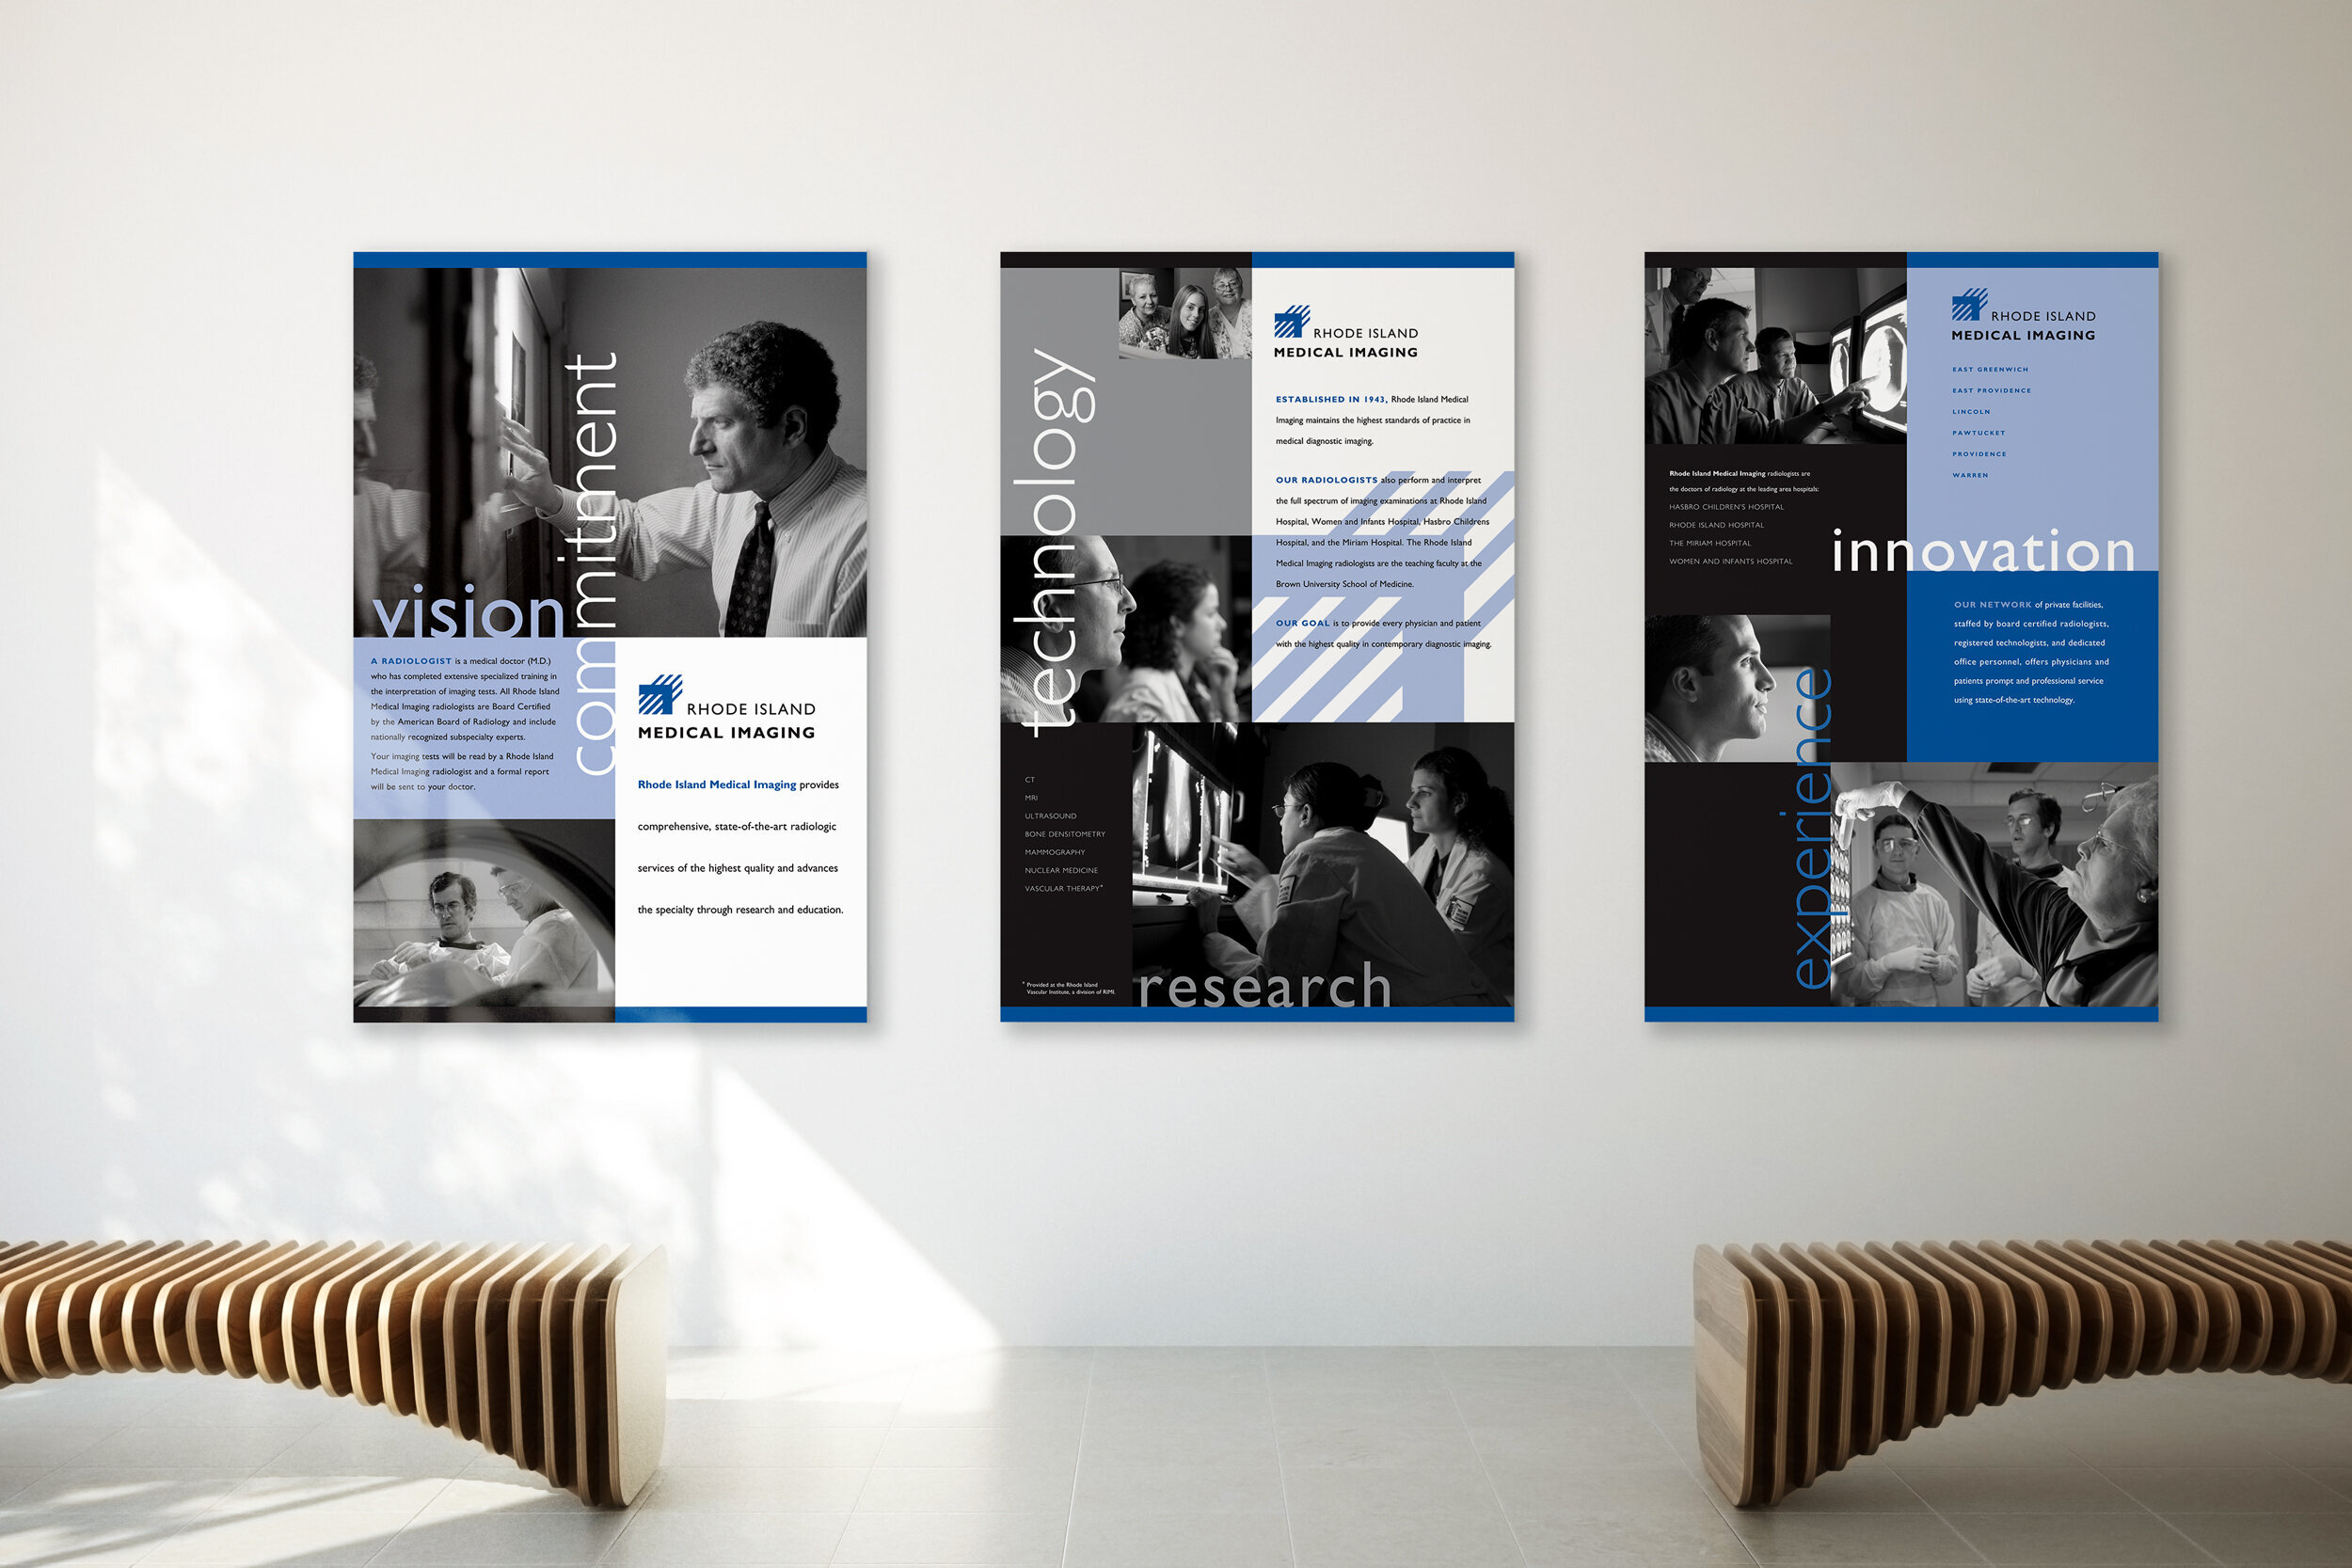   Rhode Island Medical Imaging Mission Boards  • designer: Michael Balint • direction and copy: Acadia Consulting Group 